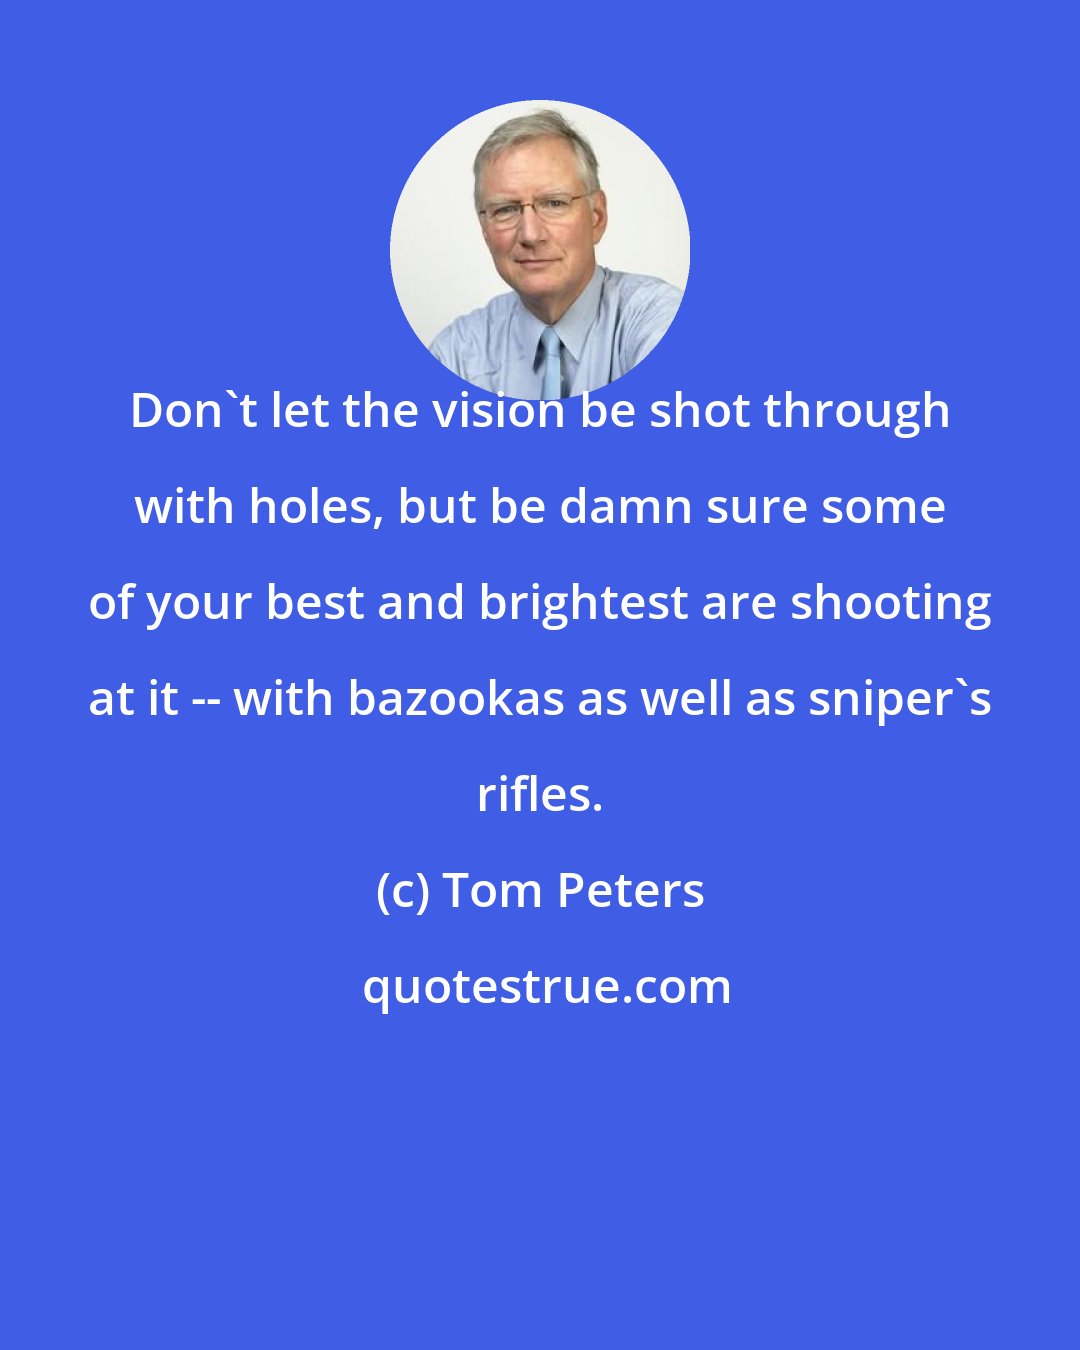 Tom Peters: Don't let the vision be shot through with holes, but be damn sure some of your best and brightest are shooting at it -- with bazookas as well as sniper's rifles.